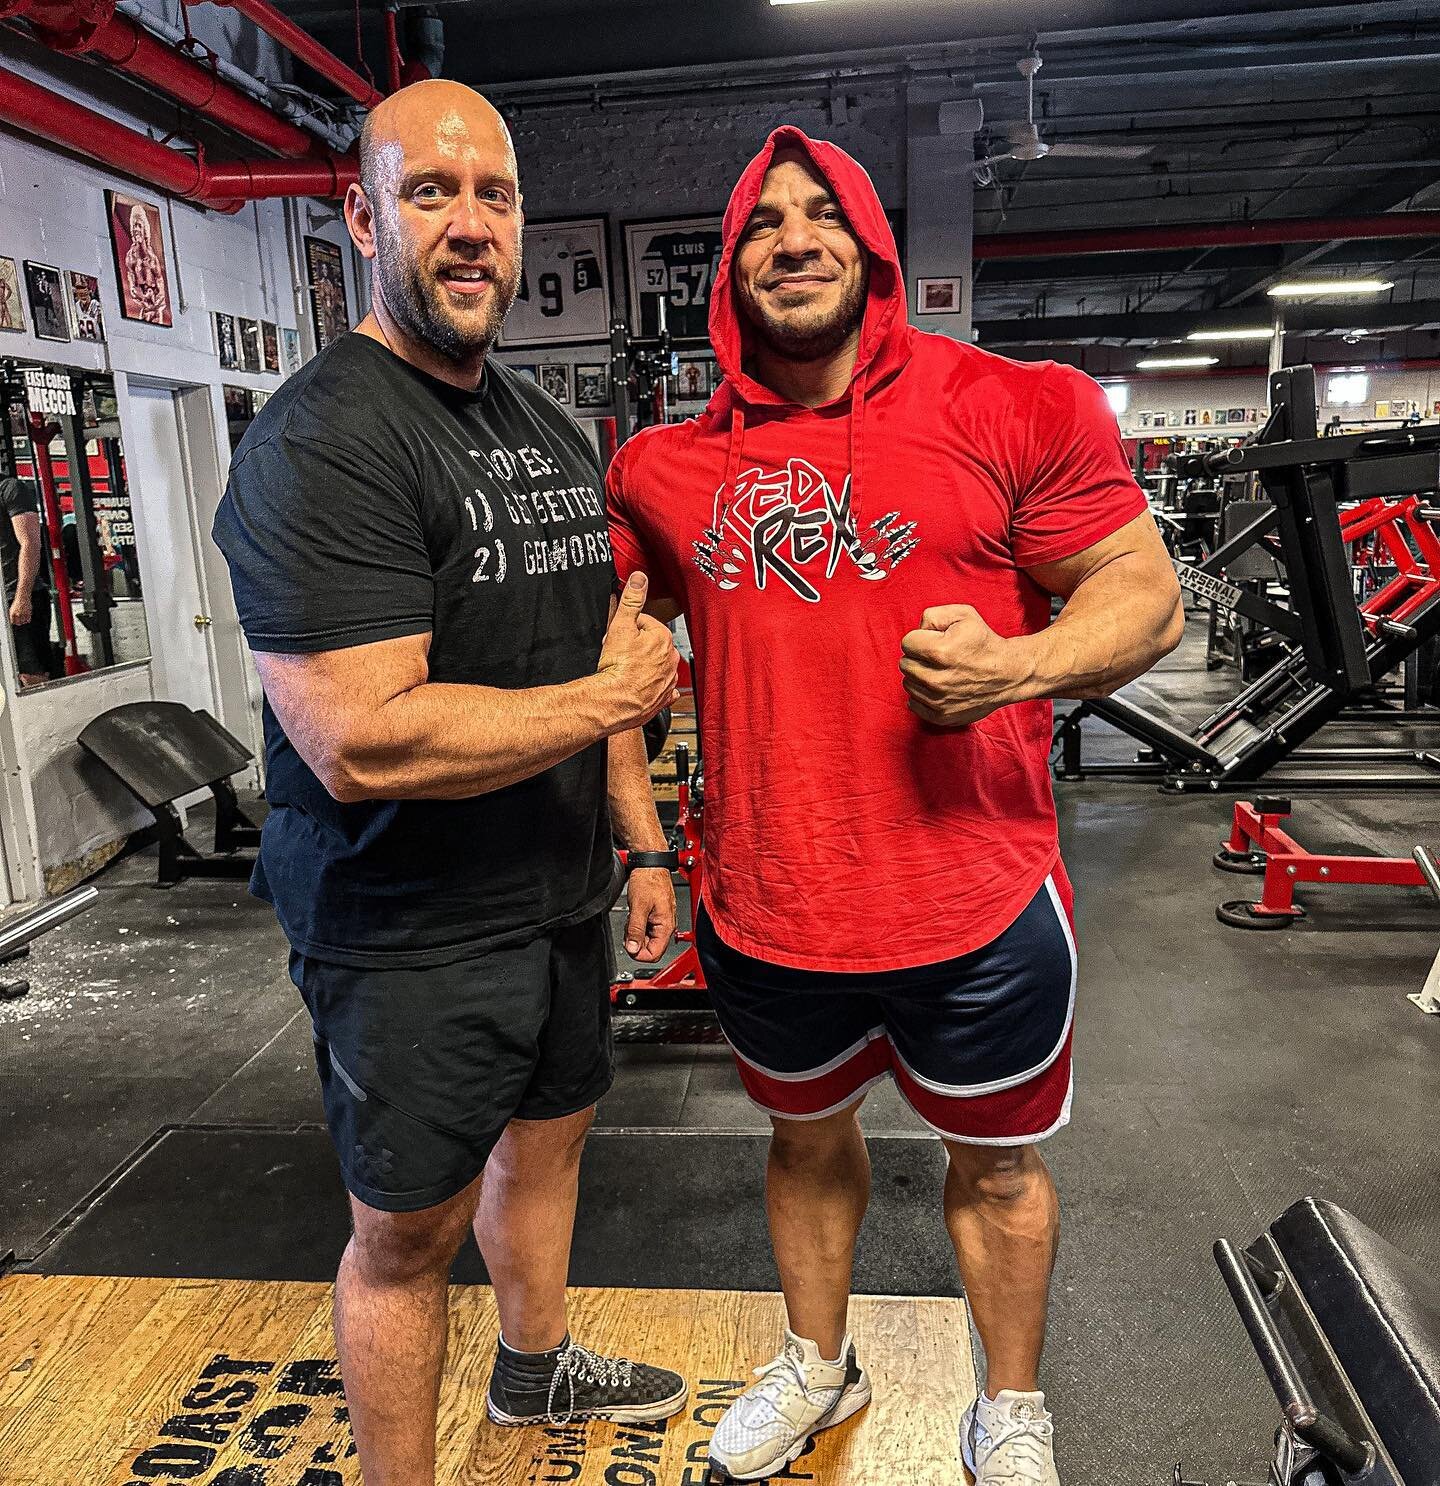 Bald is beautiful. Trained legs today next to the legendary @big_ramy 
.
@bevsgym 
.
#bevsgym
#longisland 
#gymlife #mrolympia #bodybuilding #fitnessmotivation #liftheavy